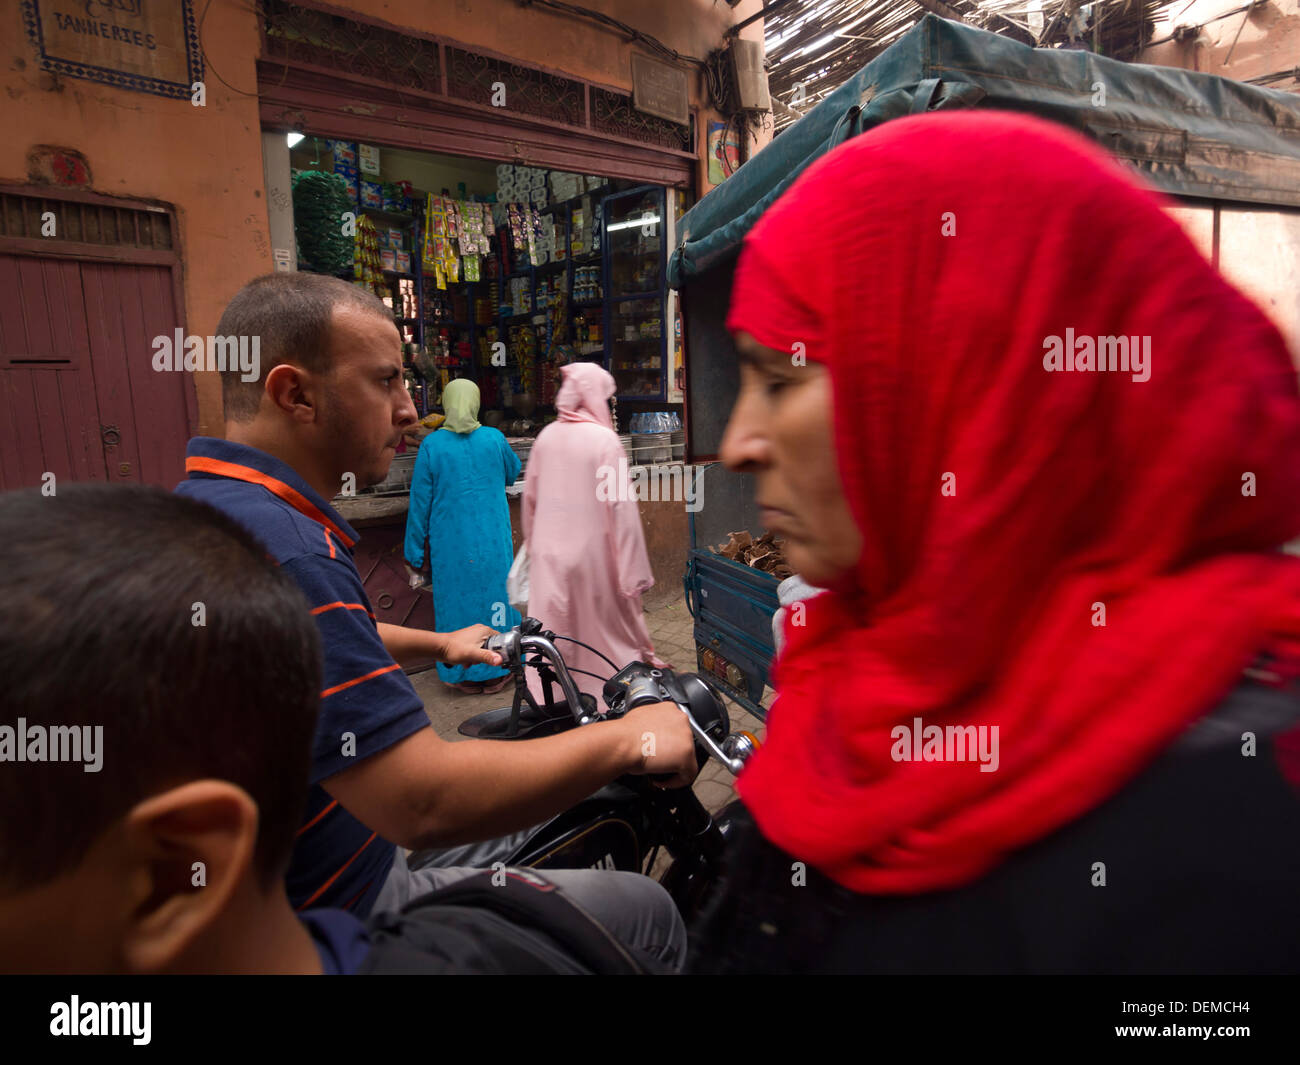 Arab woman wearing a red hijab in the crowded streets of Marrakesh, Morocco Stock Photo